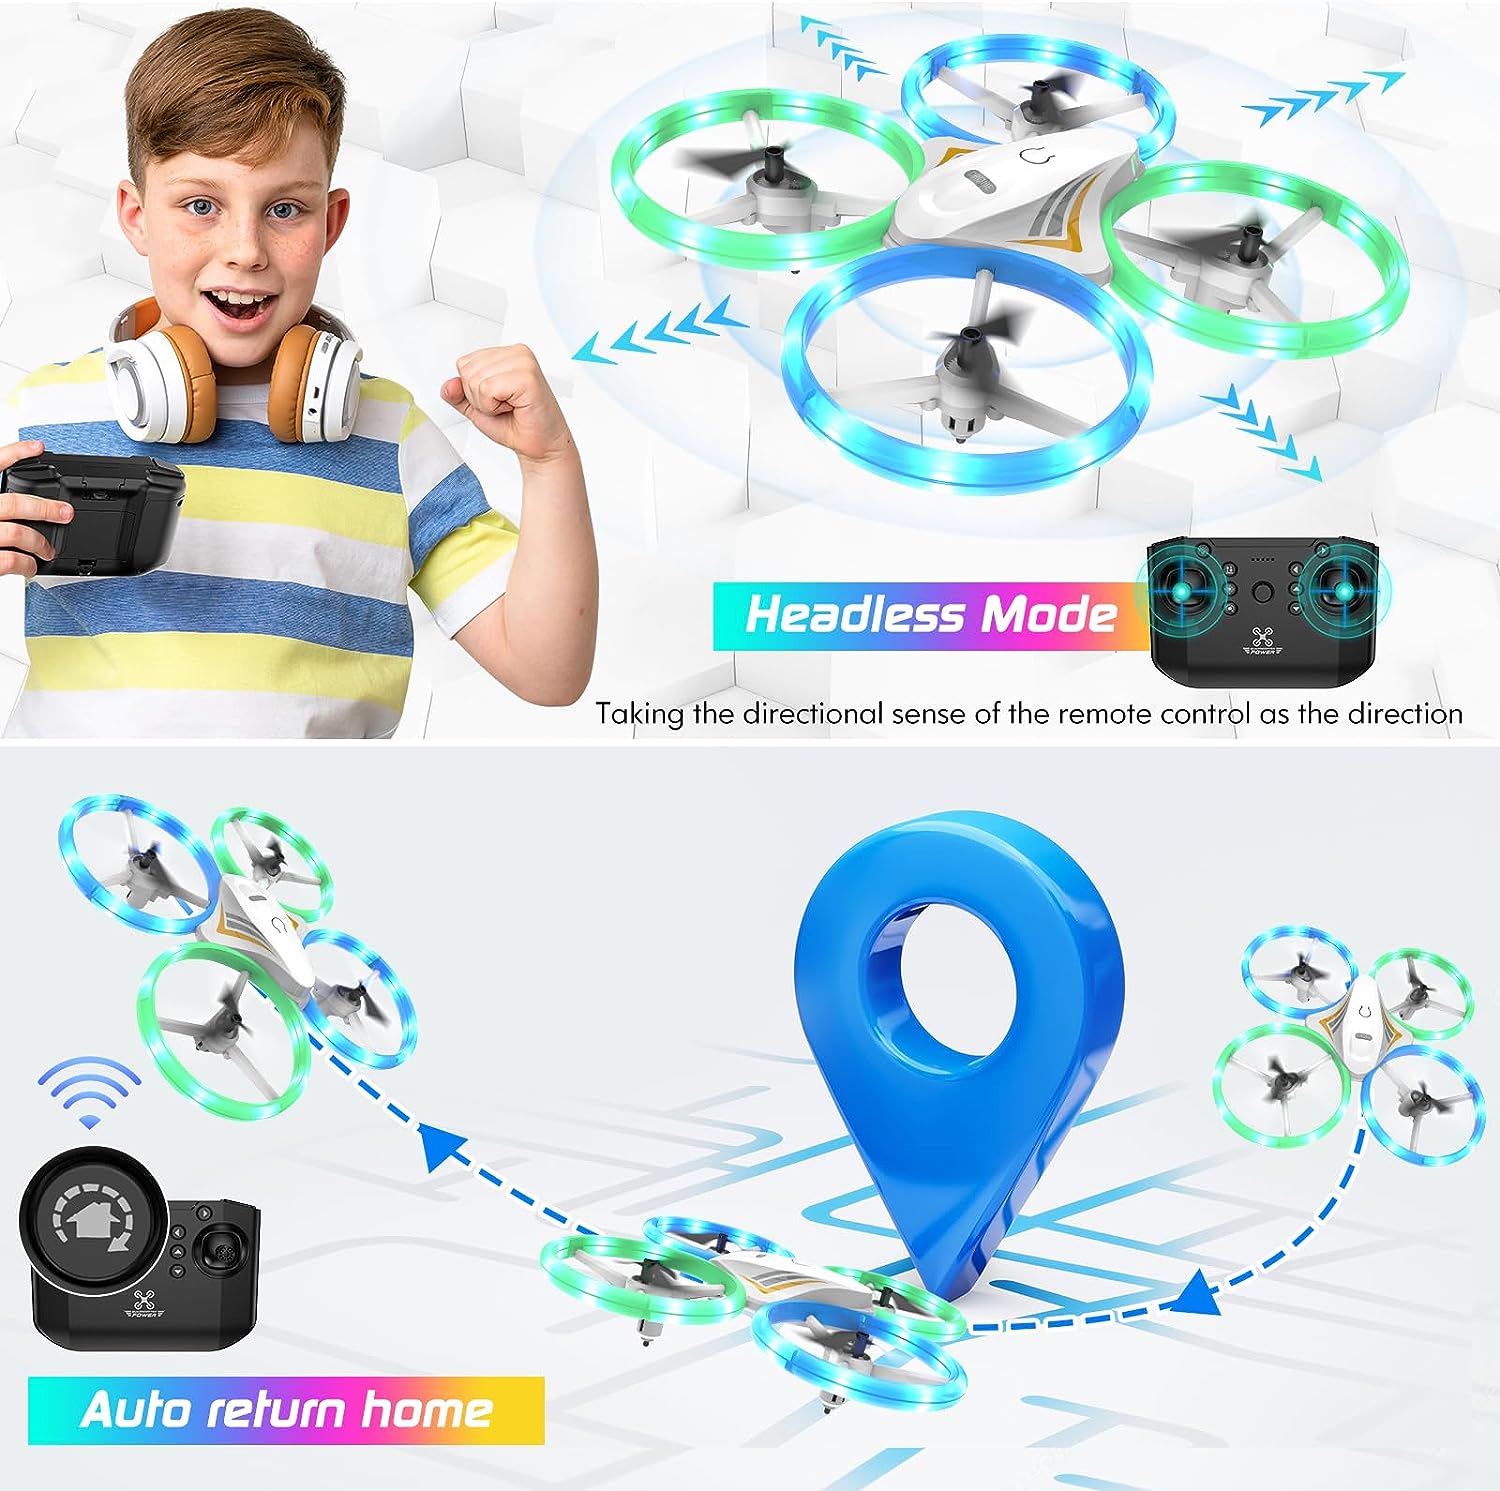 DyineeFy Mini Drone, headless mode takes the directional sense of the remote control as the